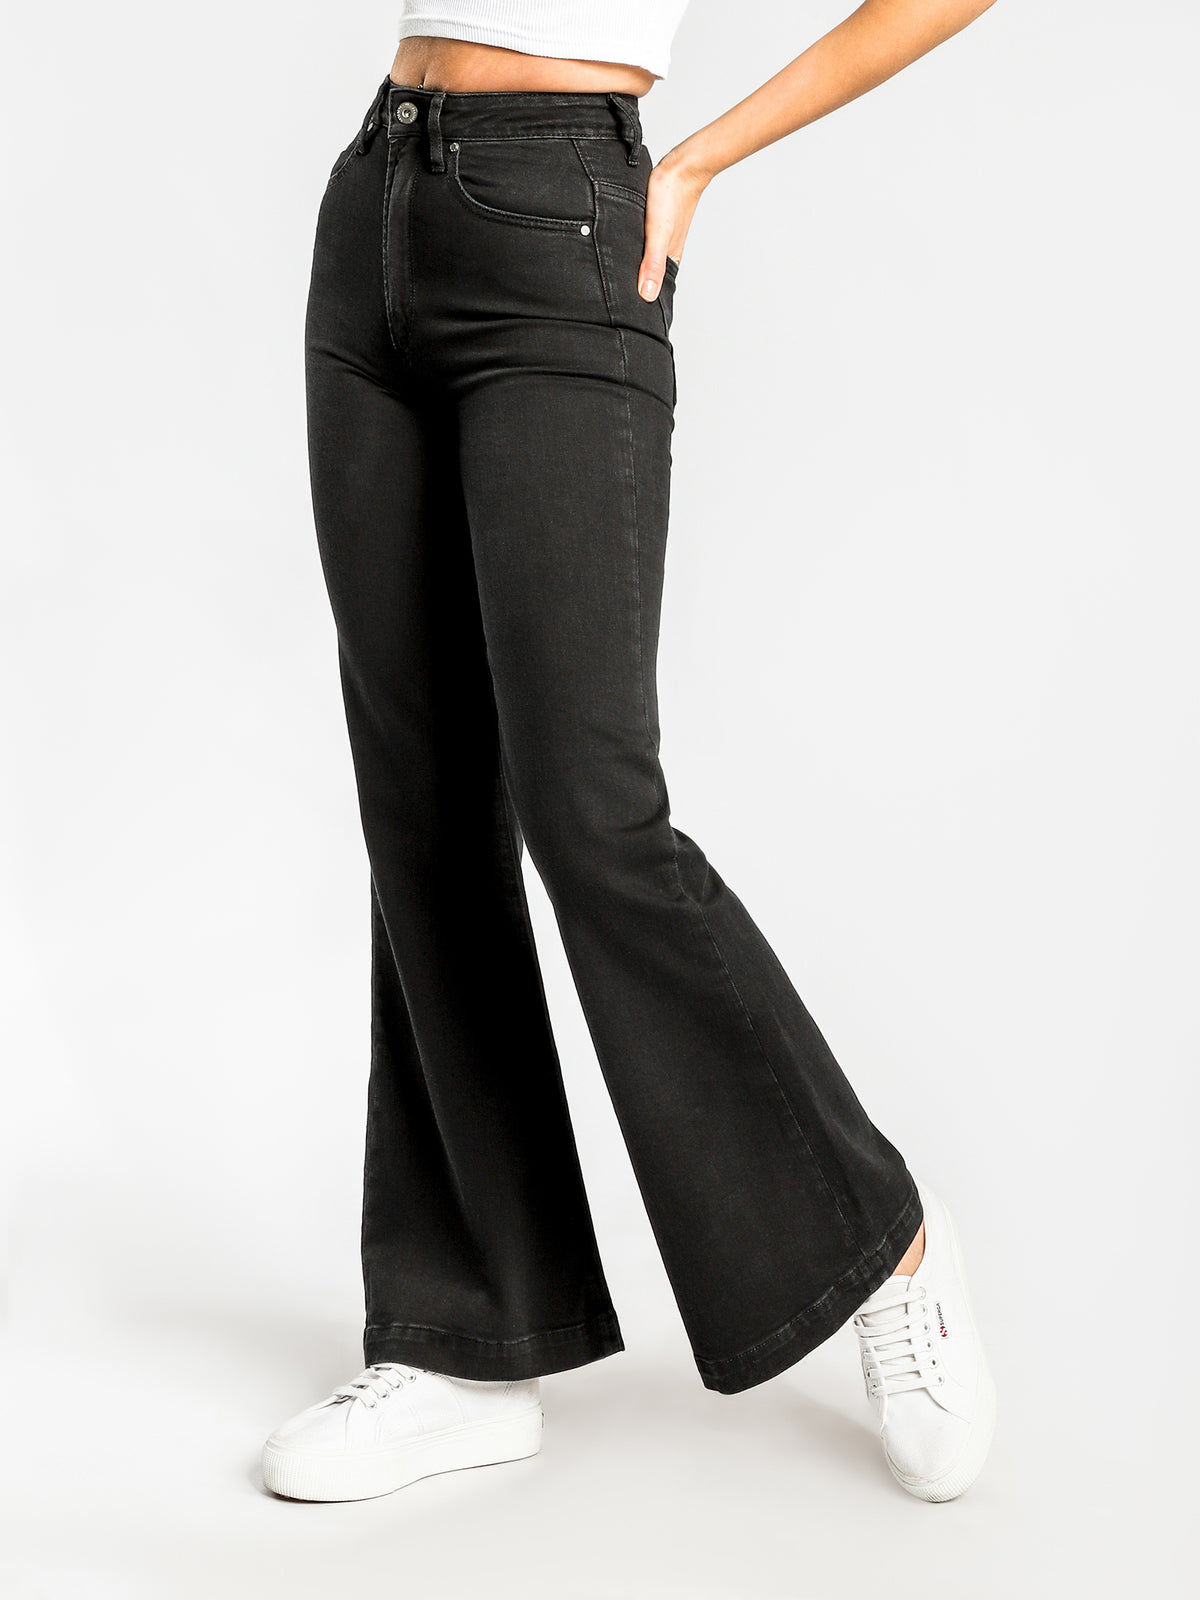 Edee Flared Jeans in Black-Out Denim